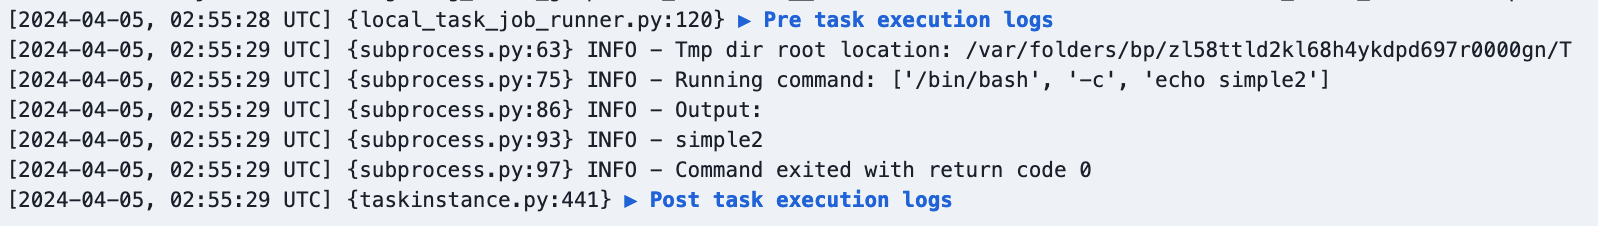 Pre and post execute logs are grouped